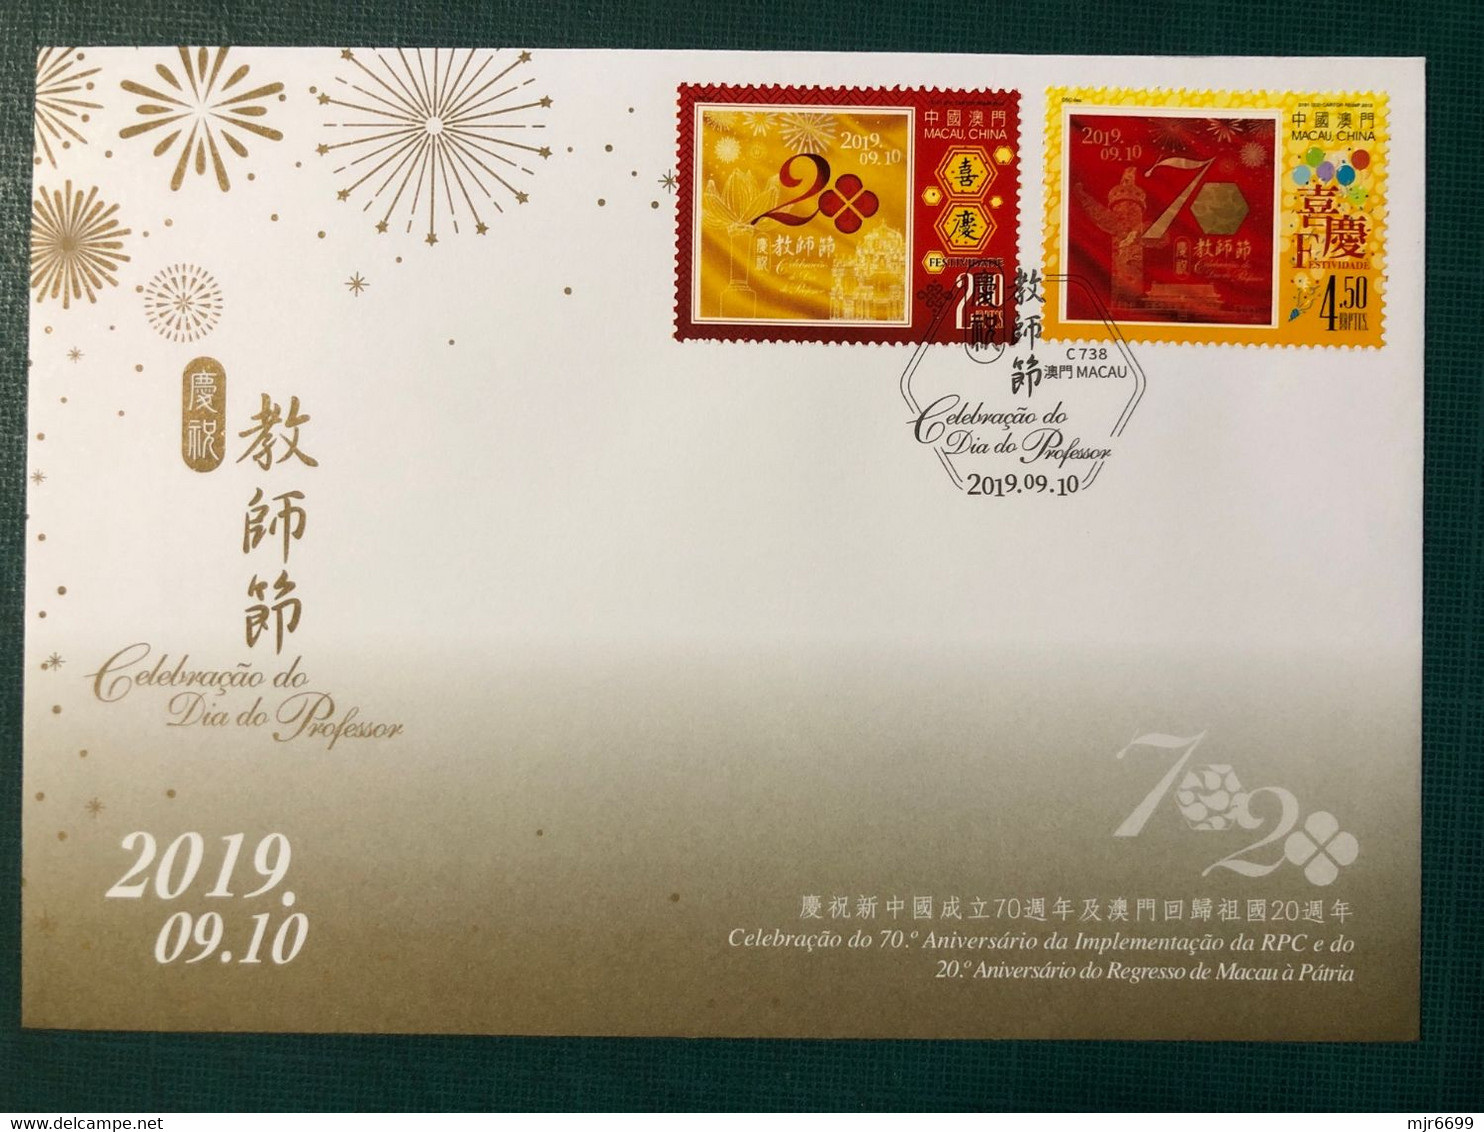 2019 TEACHER DAY SPECIAL COMMEMORATIVE COVER WITH SPECIAL PERSONALIZED STAMP, RARE - Covers & Documents